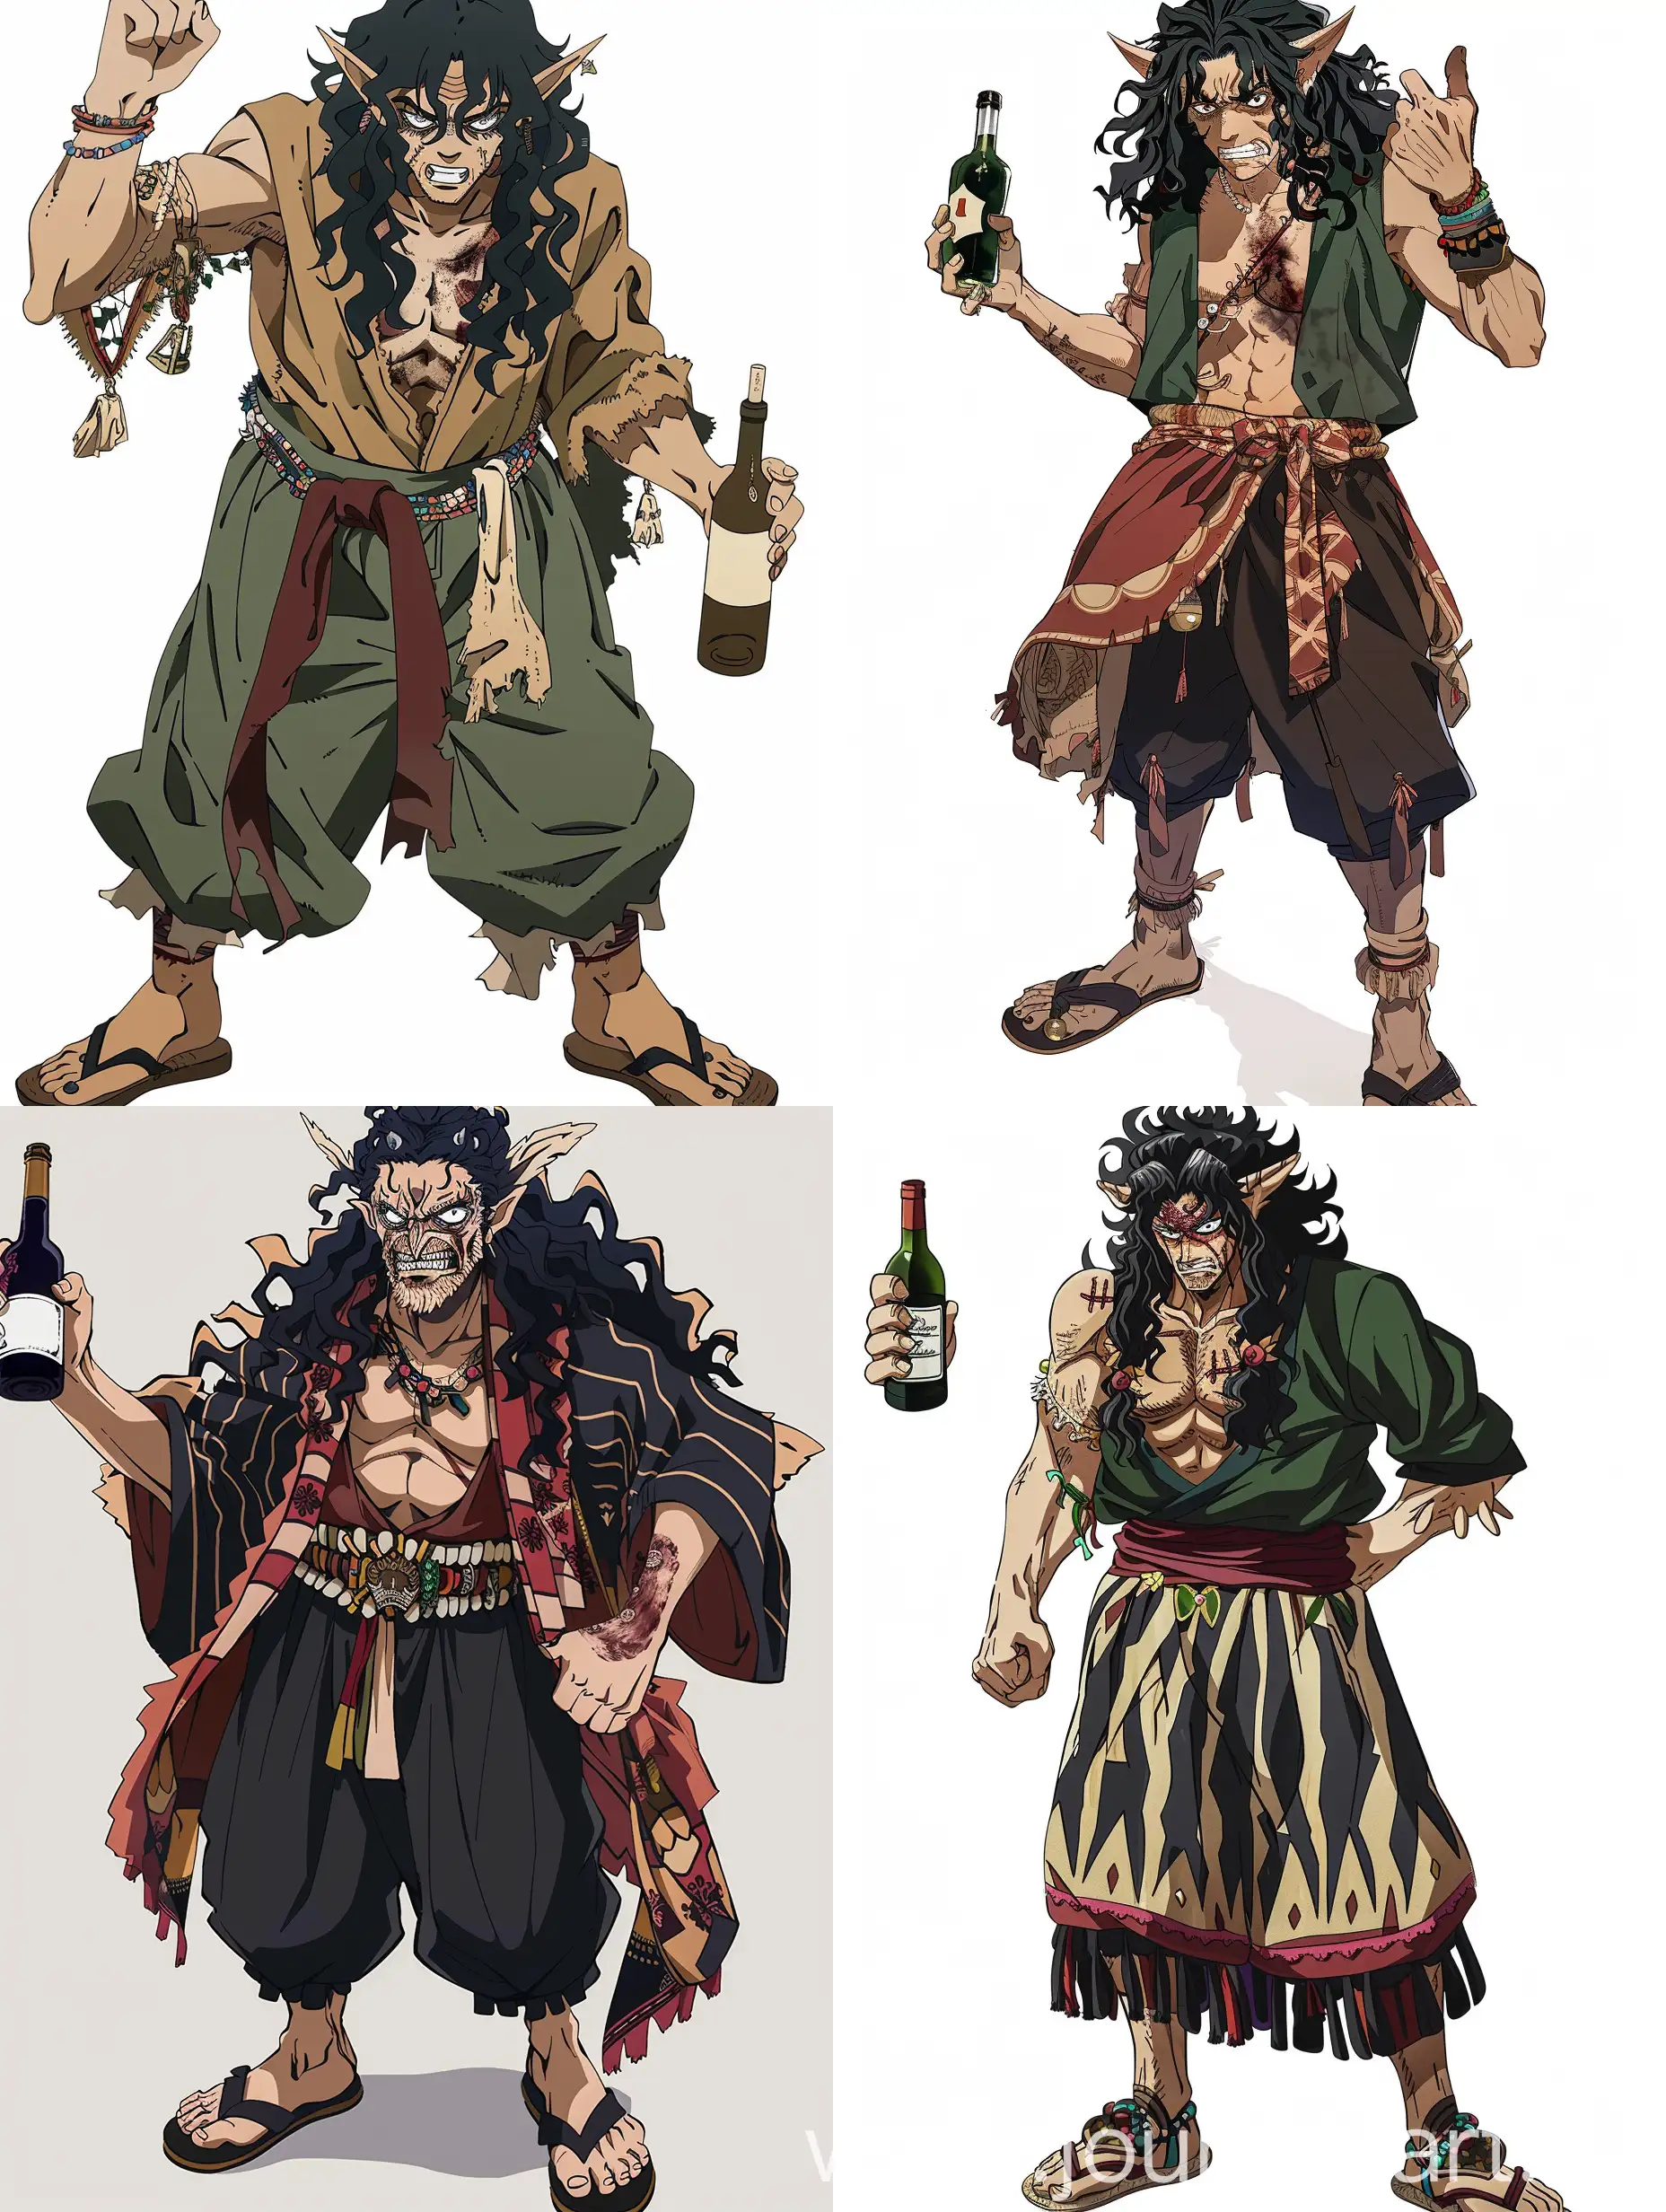 Intense-Anime-Gypsy-with-Wine-Bottle